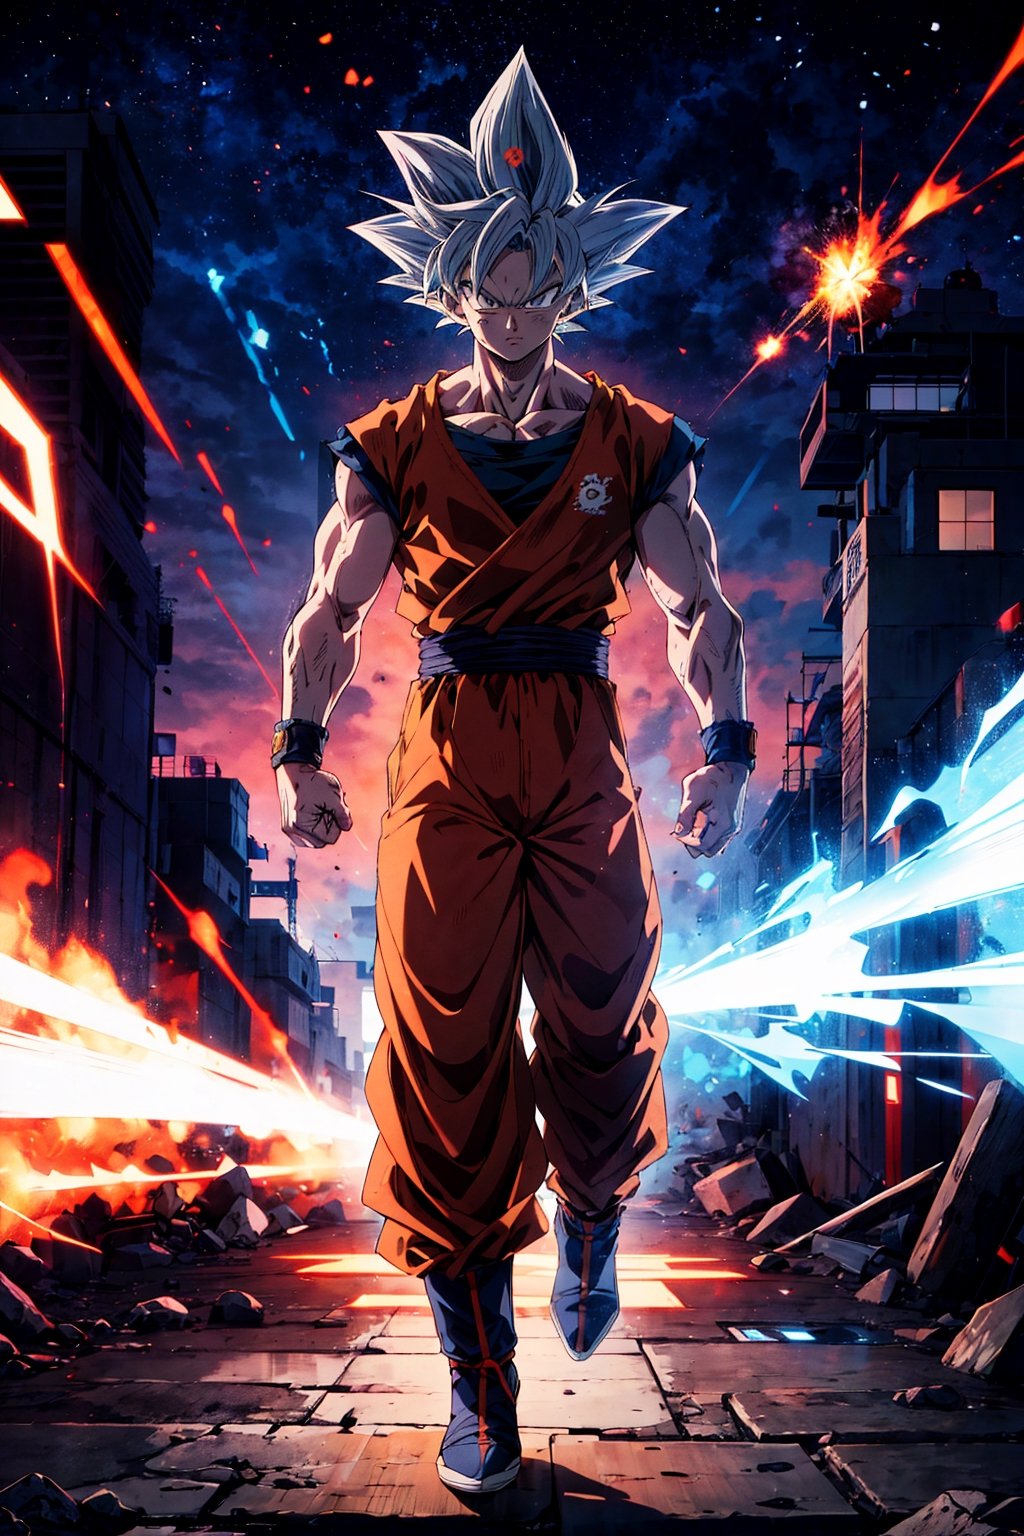 highly detailed, masterpiece, high quality, beautiful, full-body shot, son goku, son goku standing, ultra instinct, aura power, navyblue t-shirt, ((orange pants)), Insane detail in face, serious expression, closed mouth, slim, arms down, charging power, grey eyes, white hair